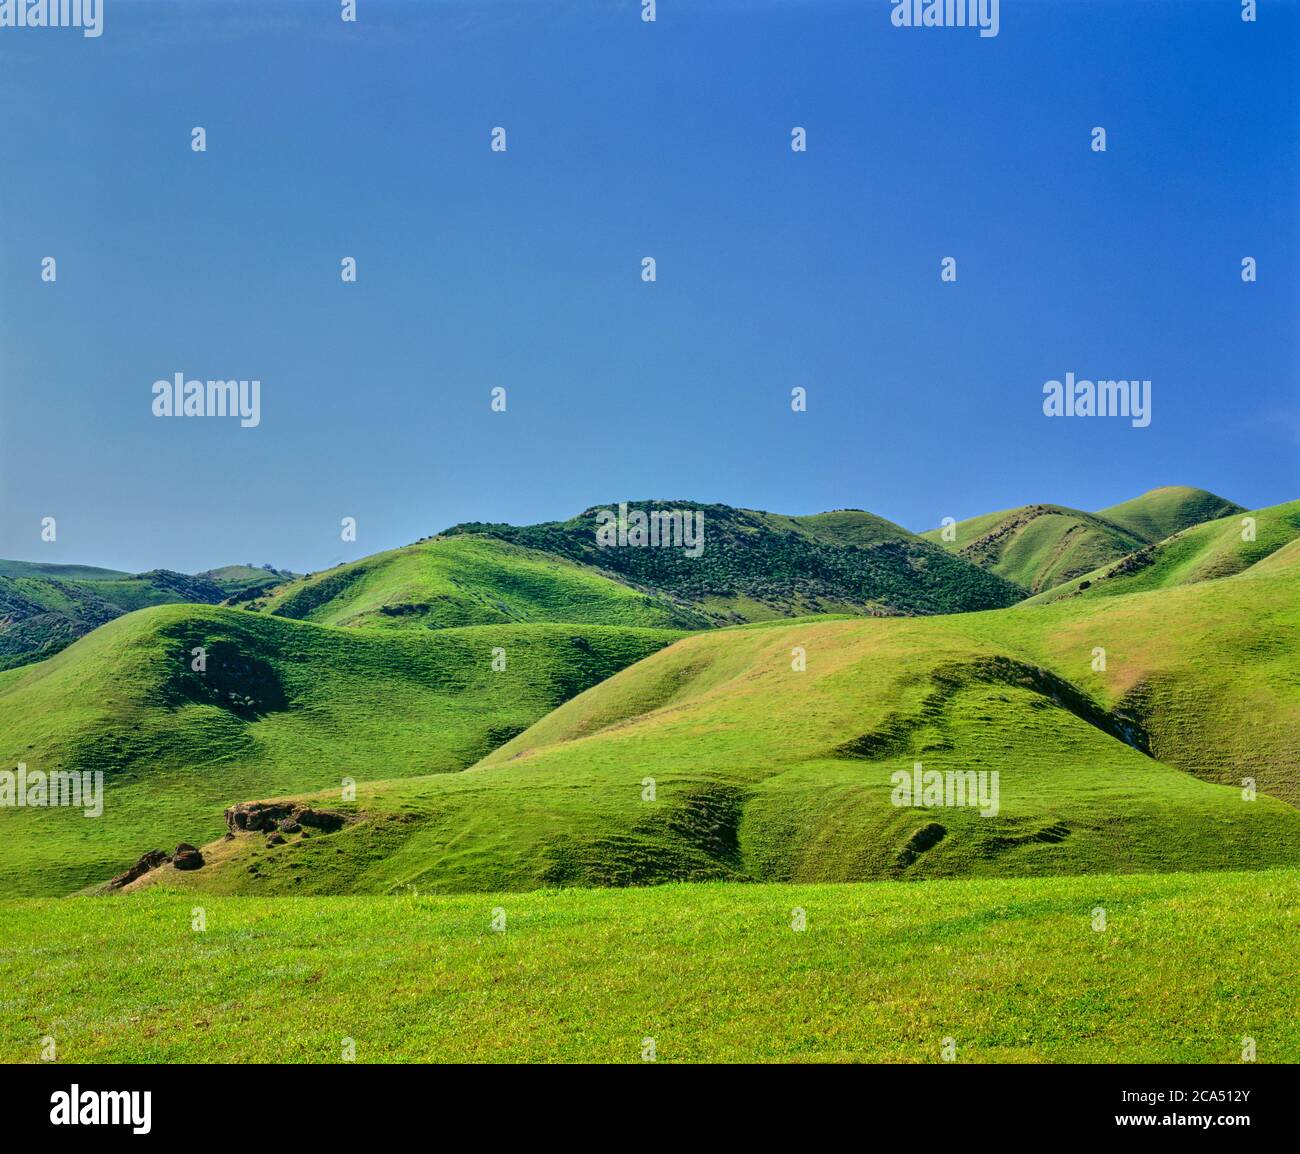 Clear sky over green rolling hills of Puerto Canyon, California, USA Stock Photo